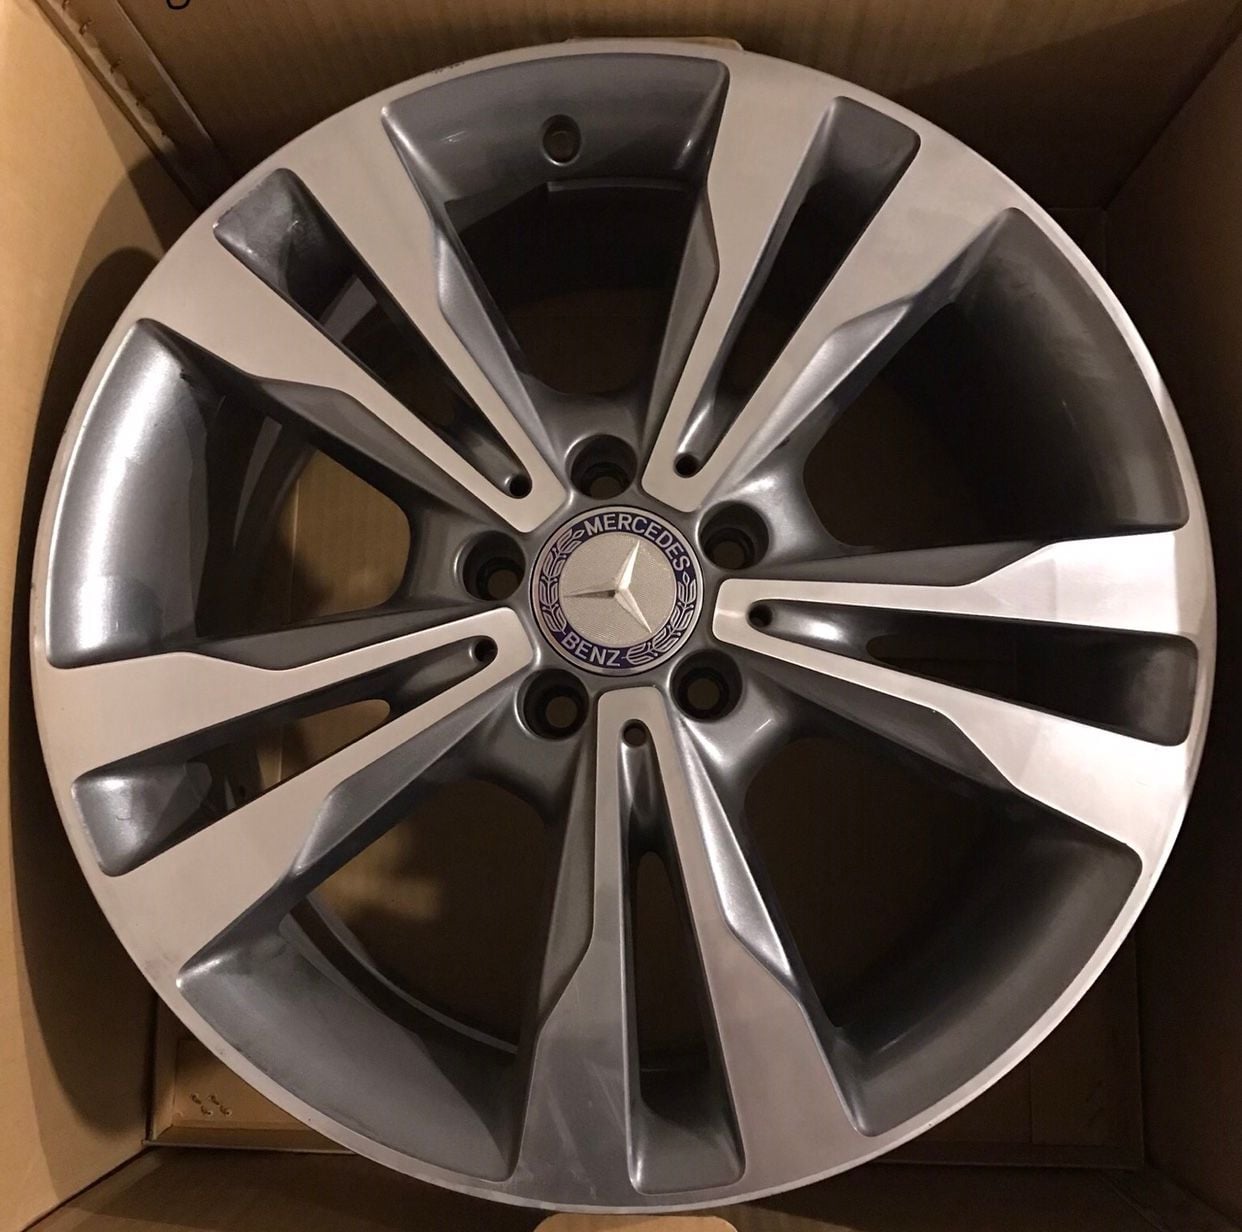 Wheels and Tires/Axles - OEM 18 inch Wheels for sale - Immaculate condition - Used - 2015 to 2019 Mercedes-Benz All Models - San Jose, CA 95133, United States